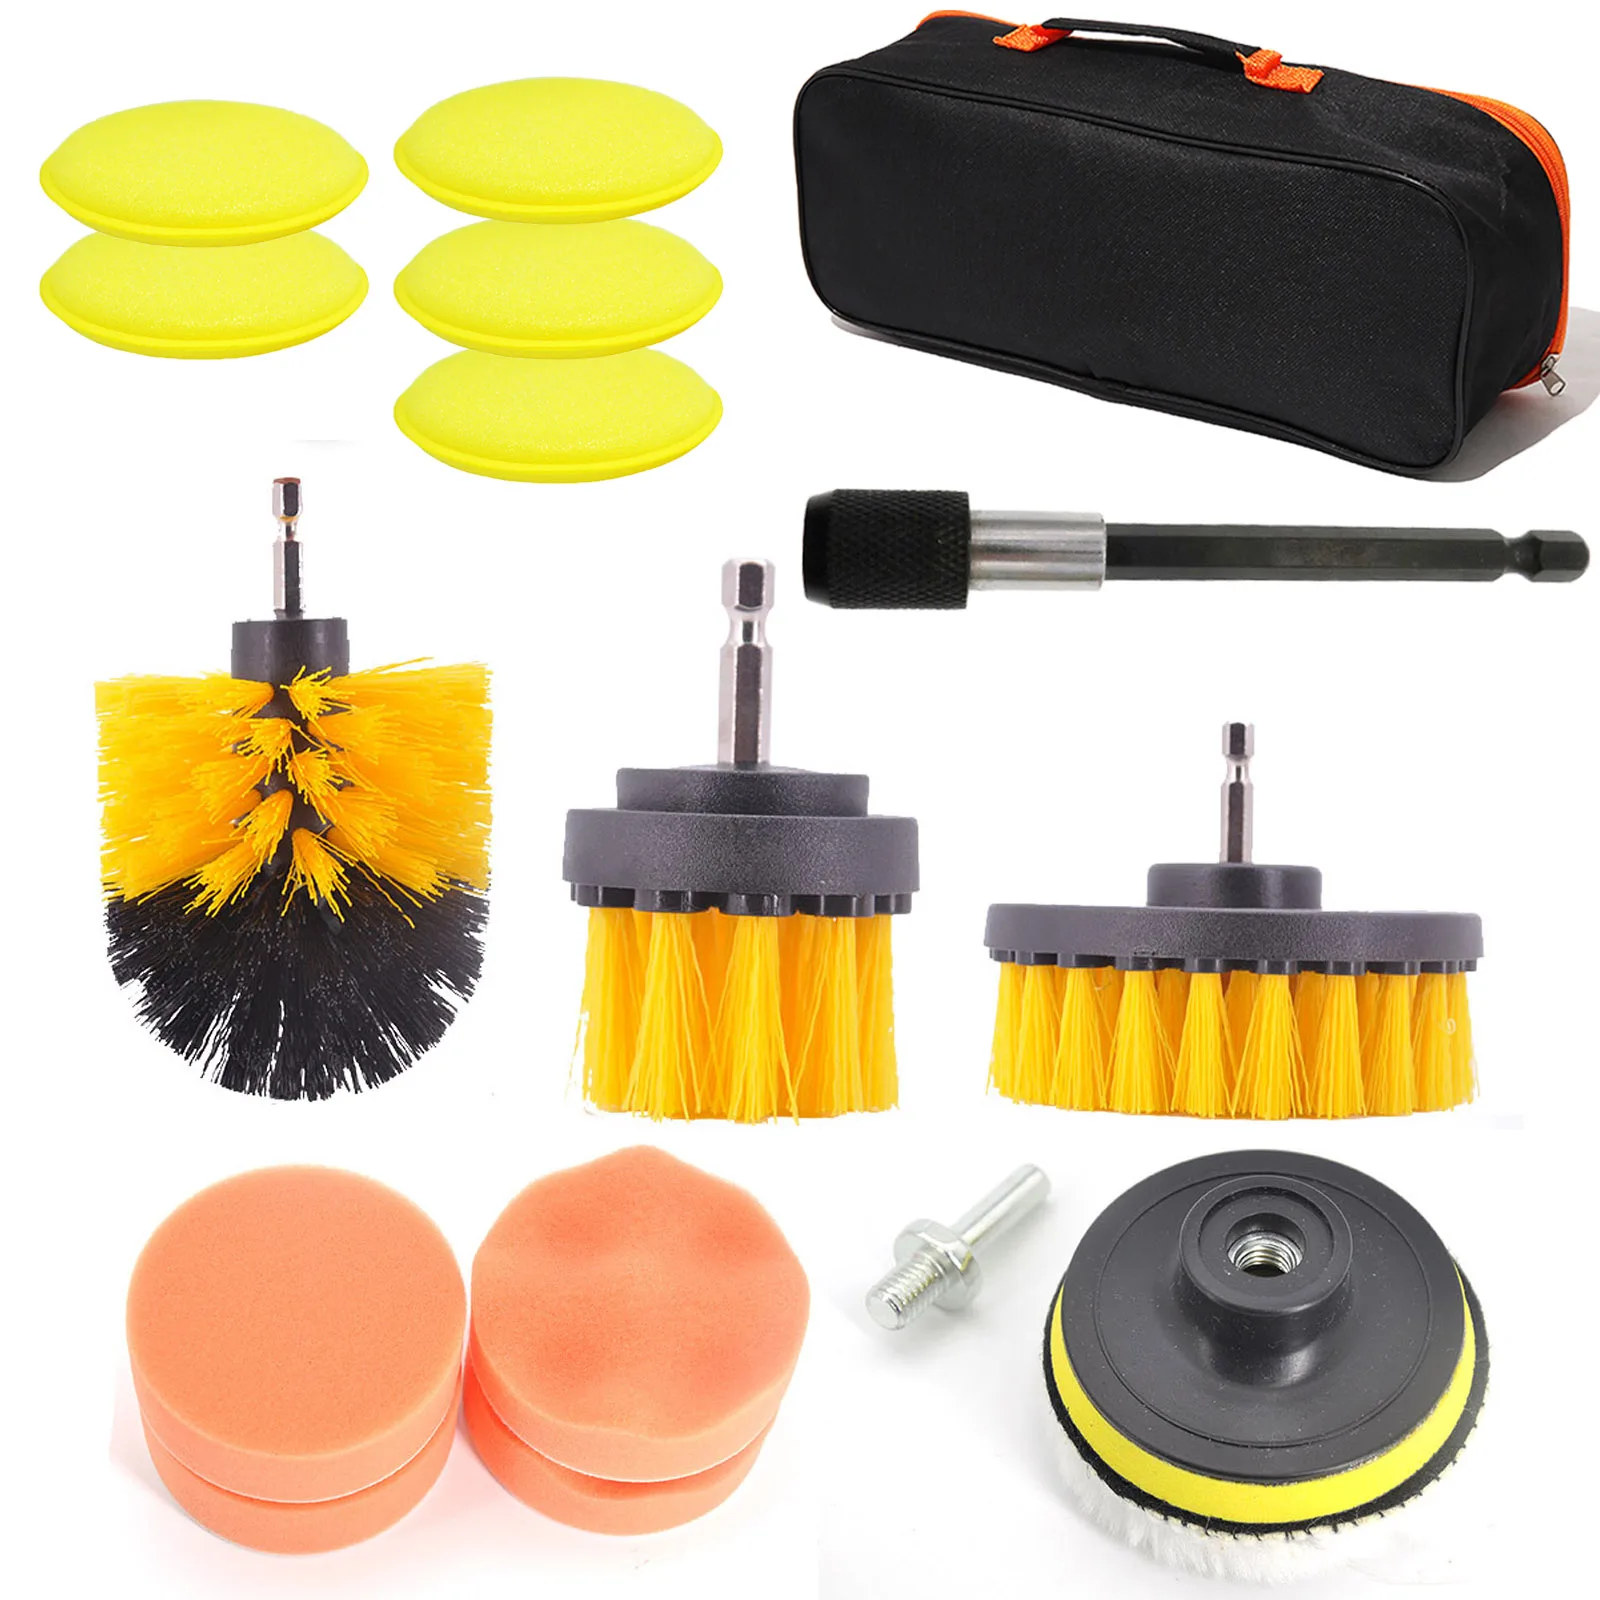 https://ae01.alicdn.com/kf/Hfbfee13e525b4d3eab6470aa23c29250v/Car-Cleaning-Kit-Scrubber-Drill-Detailing-Brush-Set-Air-Conditioner-Vents-Towel-Washing-Gloves-Polisher-Adapter.jpg